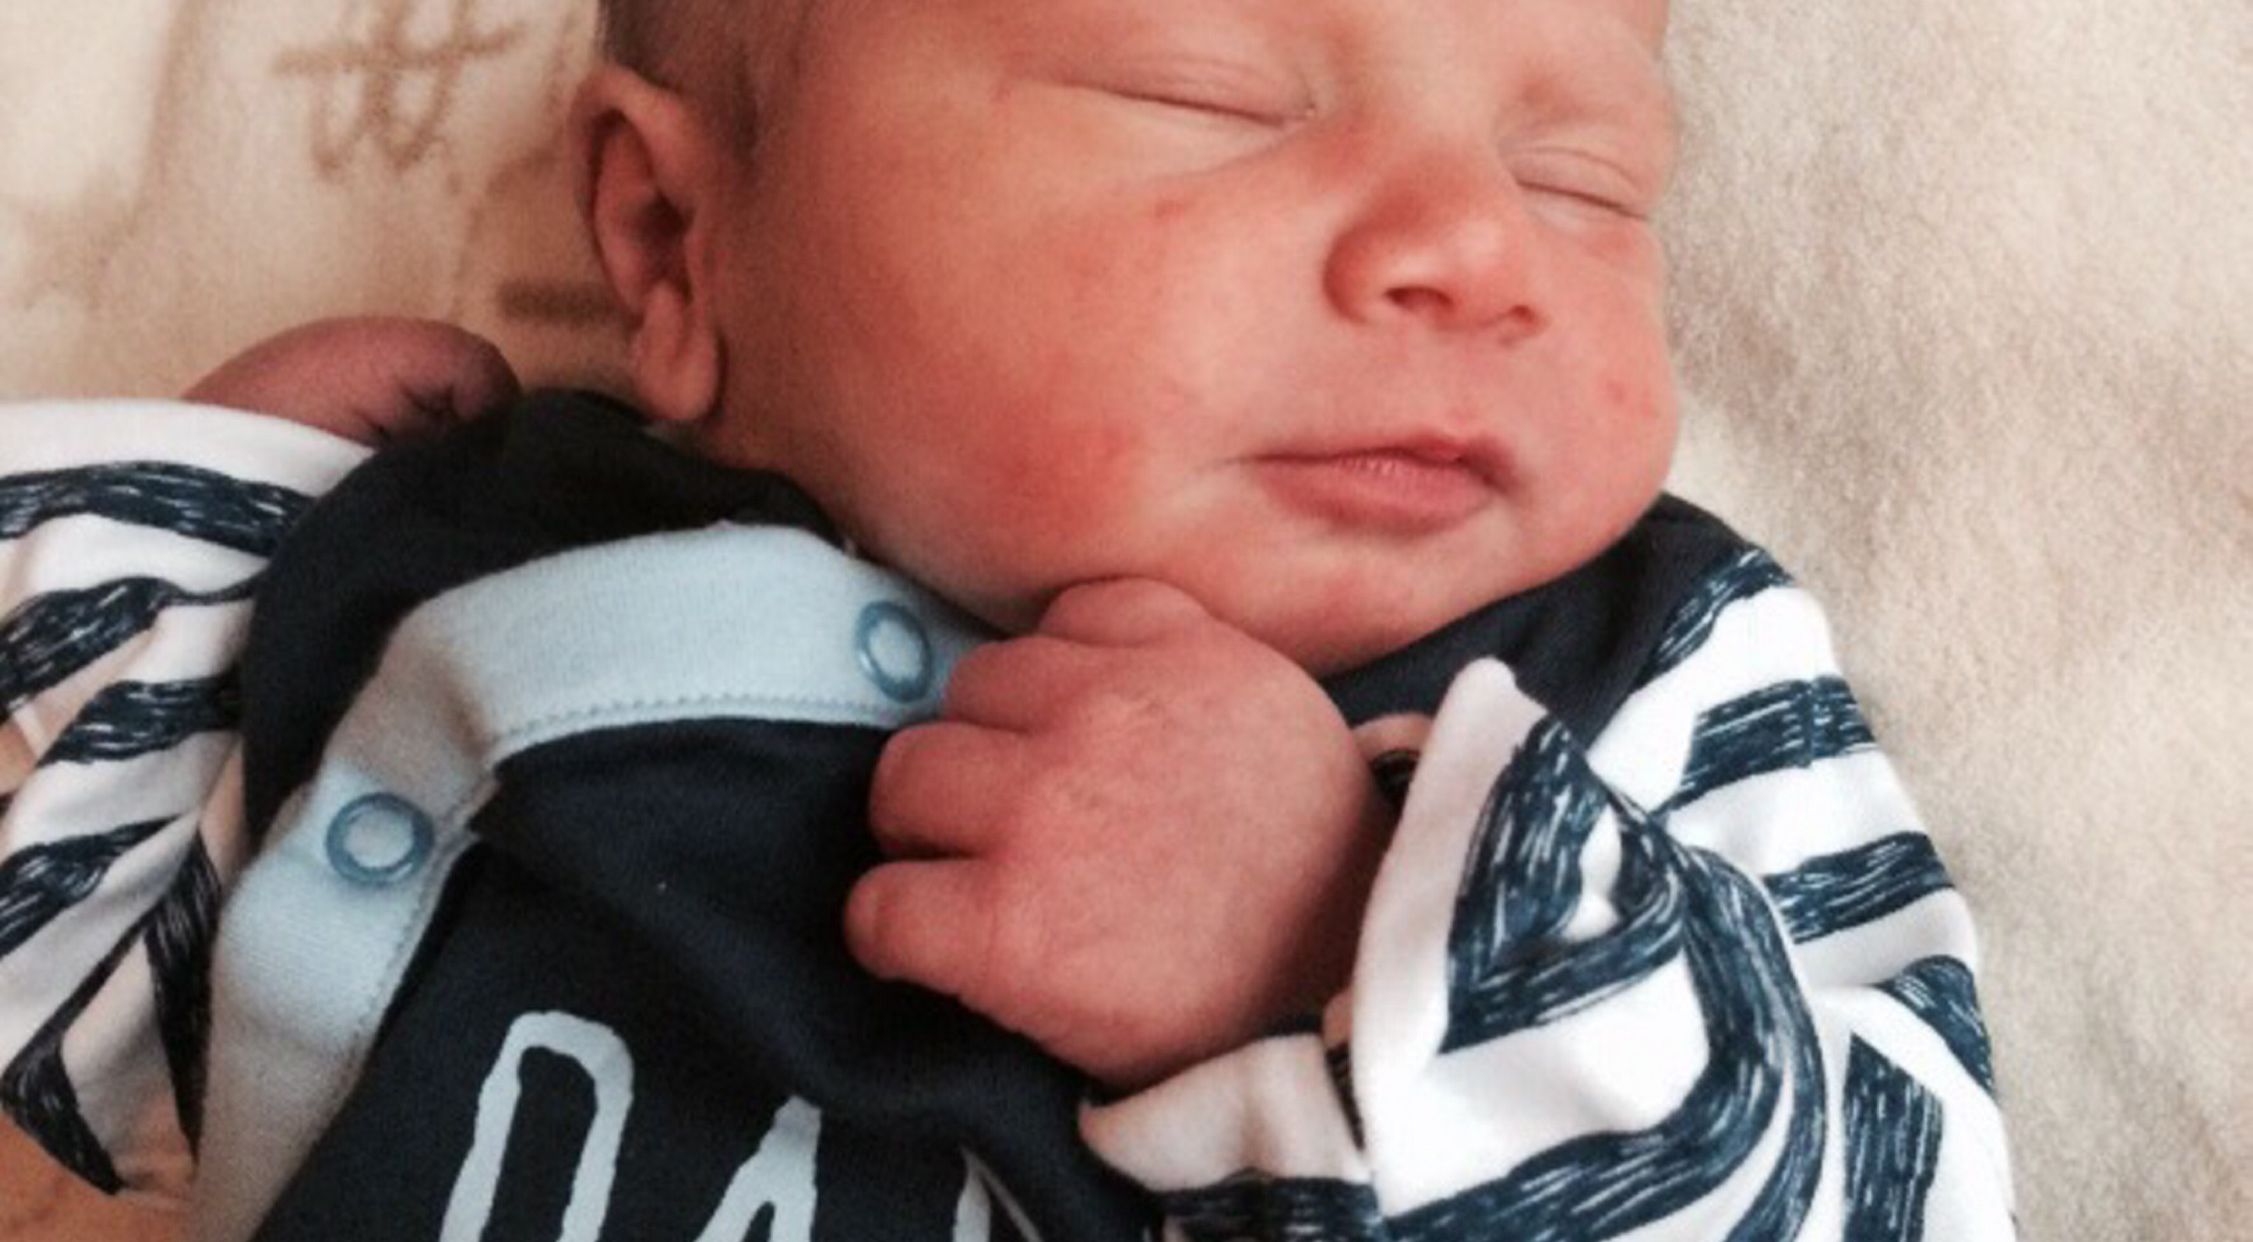 Just born: Cillian O'Neill - oh boy! what a surprise